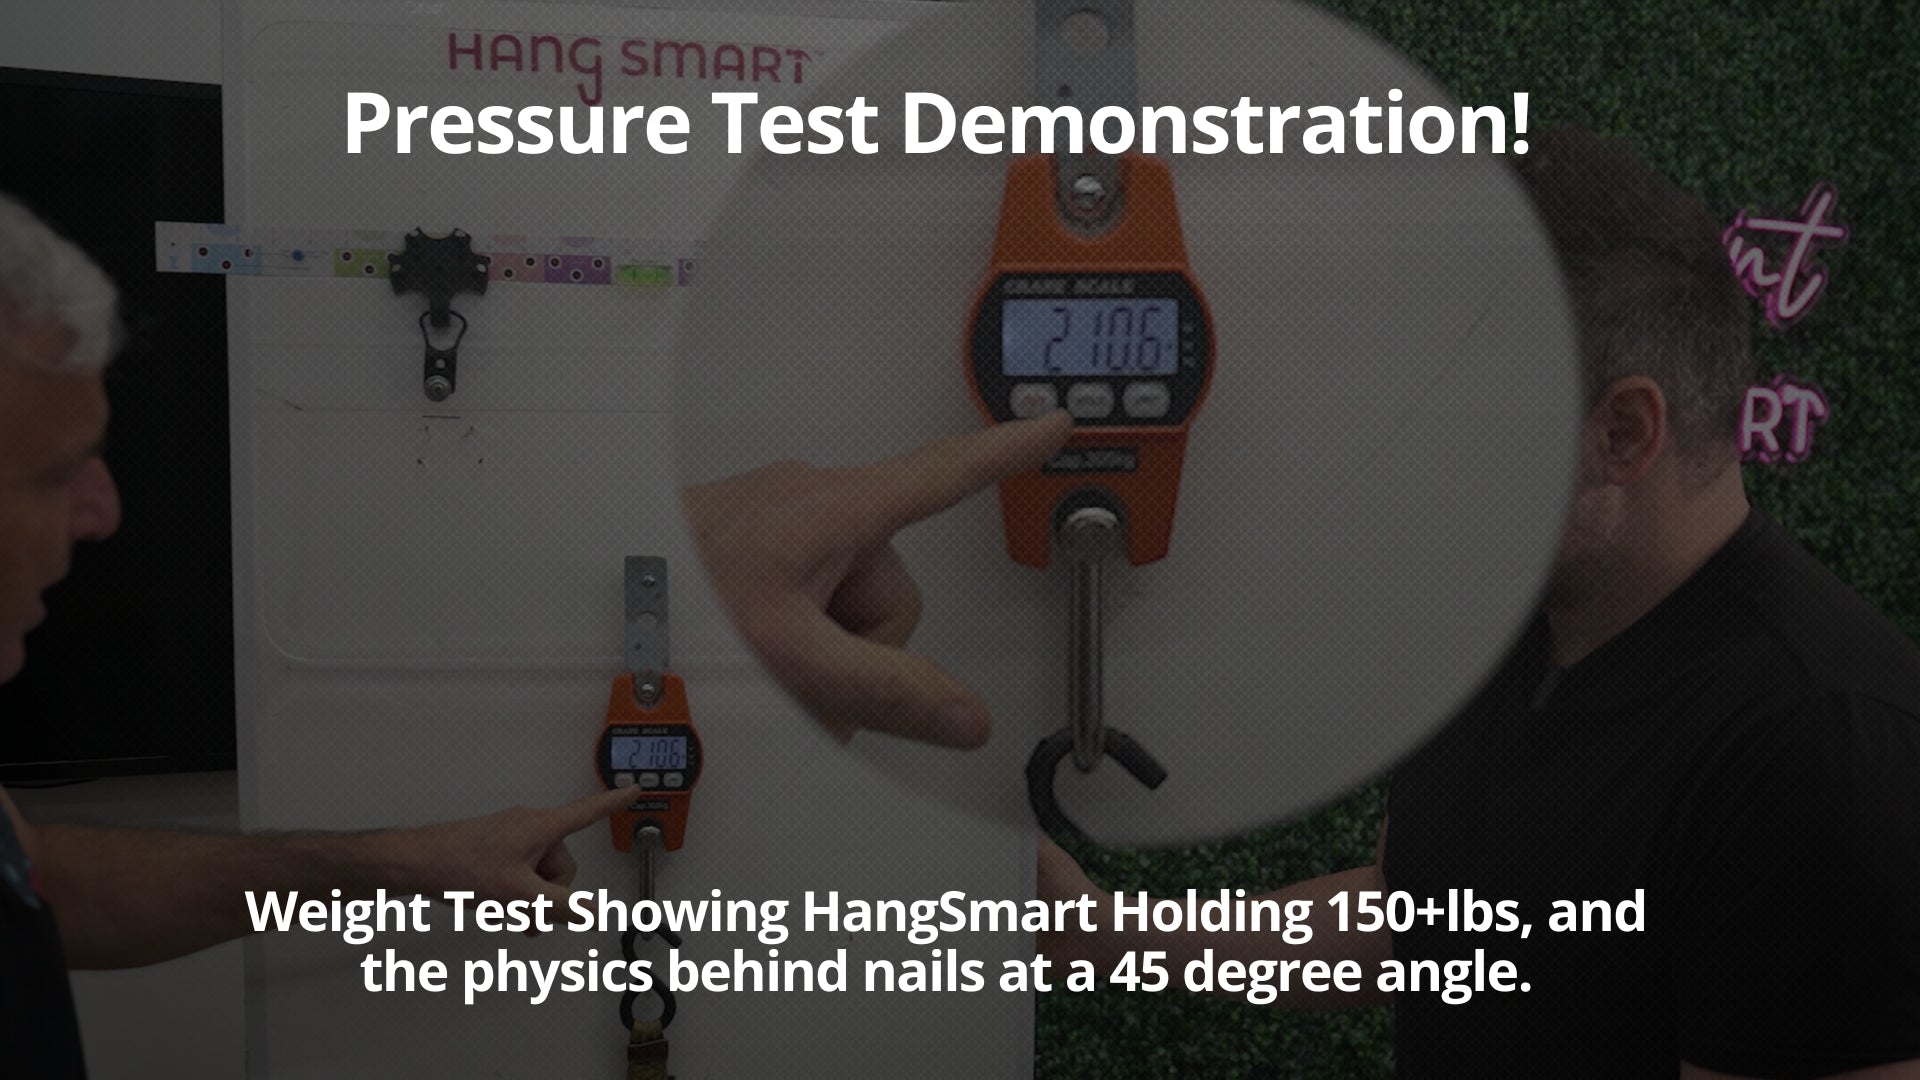 Load video: HangSmart Pressure Test Demonstration, showing HangSmart holding the weight of 150lbs and thoroughly explaining the physics behind a nail at a 45 degree angle.